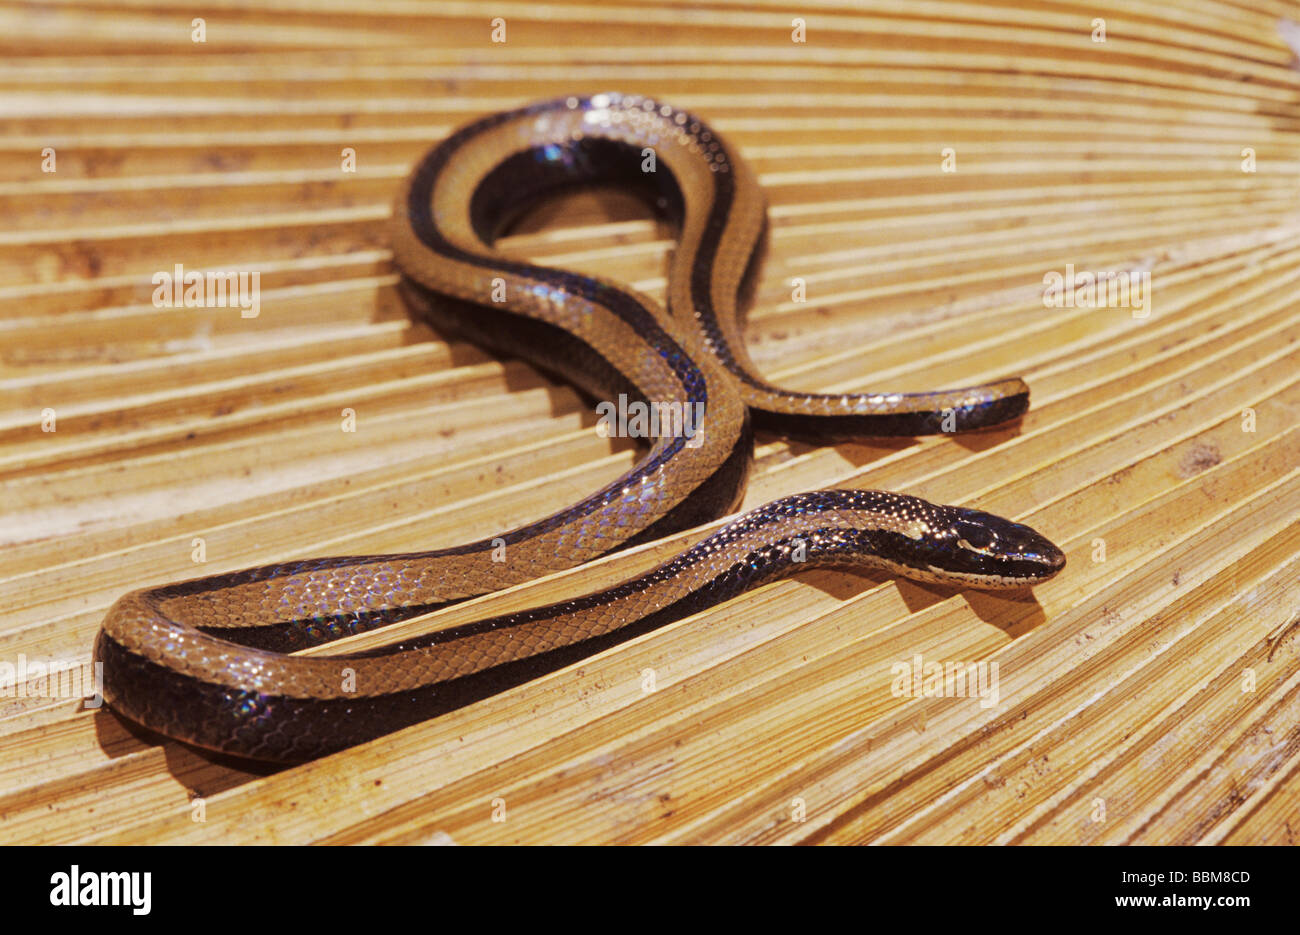 Black Striped Snake Coniophanes imperialis adult on dead palm frond Cameron County Rio Grande Valley Texas USA Stock Photo